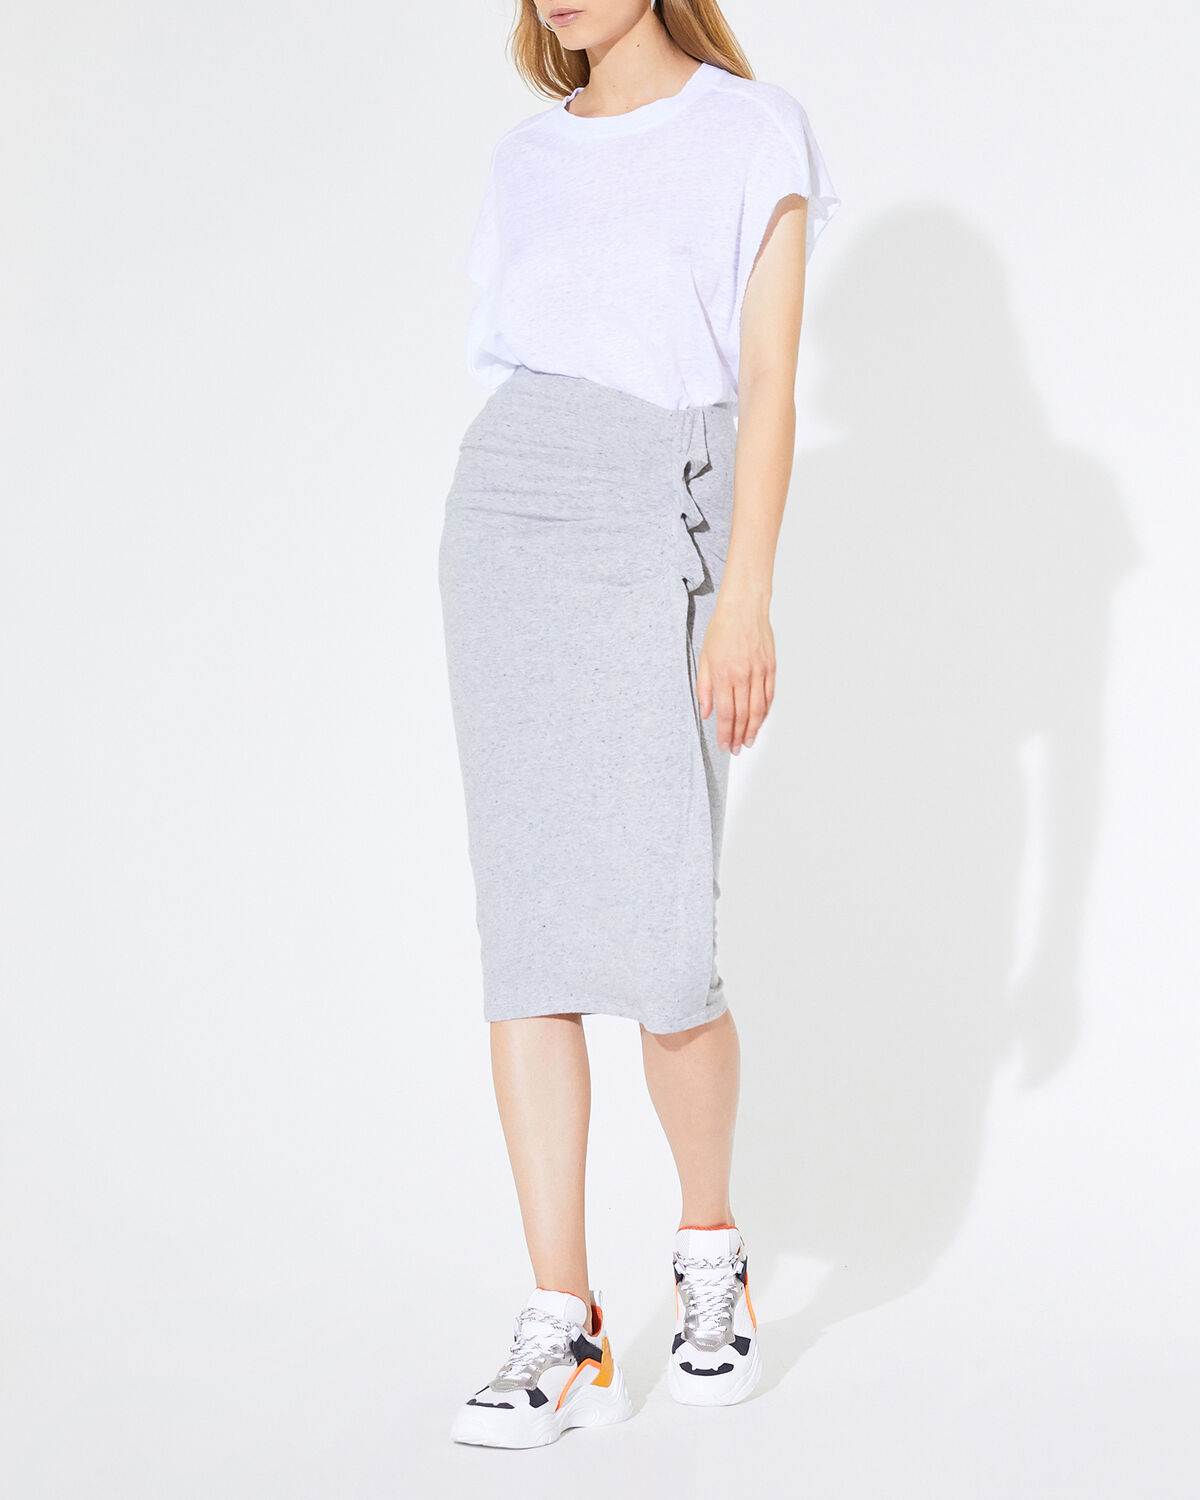 Photo of IRO Paris Wilber Long Skirt Mixed Grey - Dare To Wear The Chic Sportwear Look With This Long Skirt Close To The Body. It Is Distinguished By Its Pleats And Side Ruffles. Wear It With A Pair Of Vintage-inspired Sneakers. Fall Winter 19